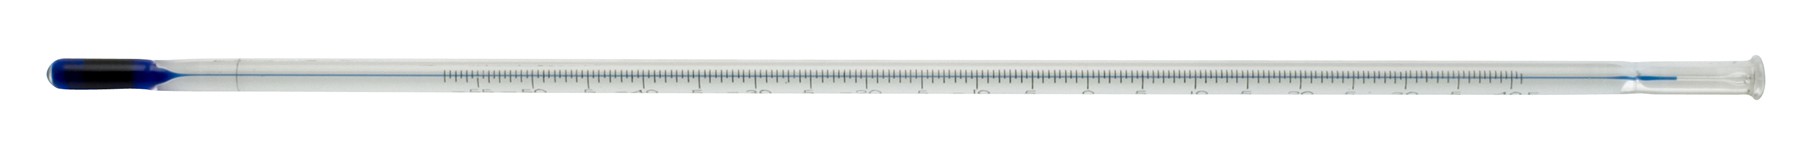 H-B DURAC Plus ASTM Like Liquid-In-Glass Thermometer; 12F / Density-Wide Range, Total Immersion, -5 to 215C, Organic Liquid Fill